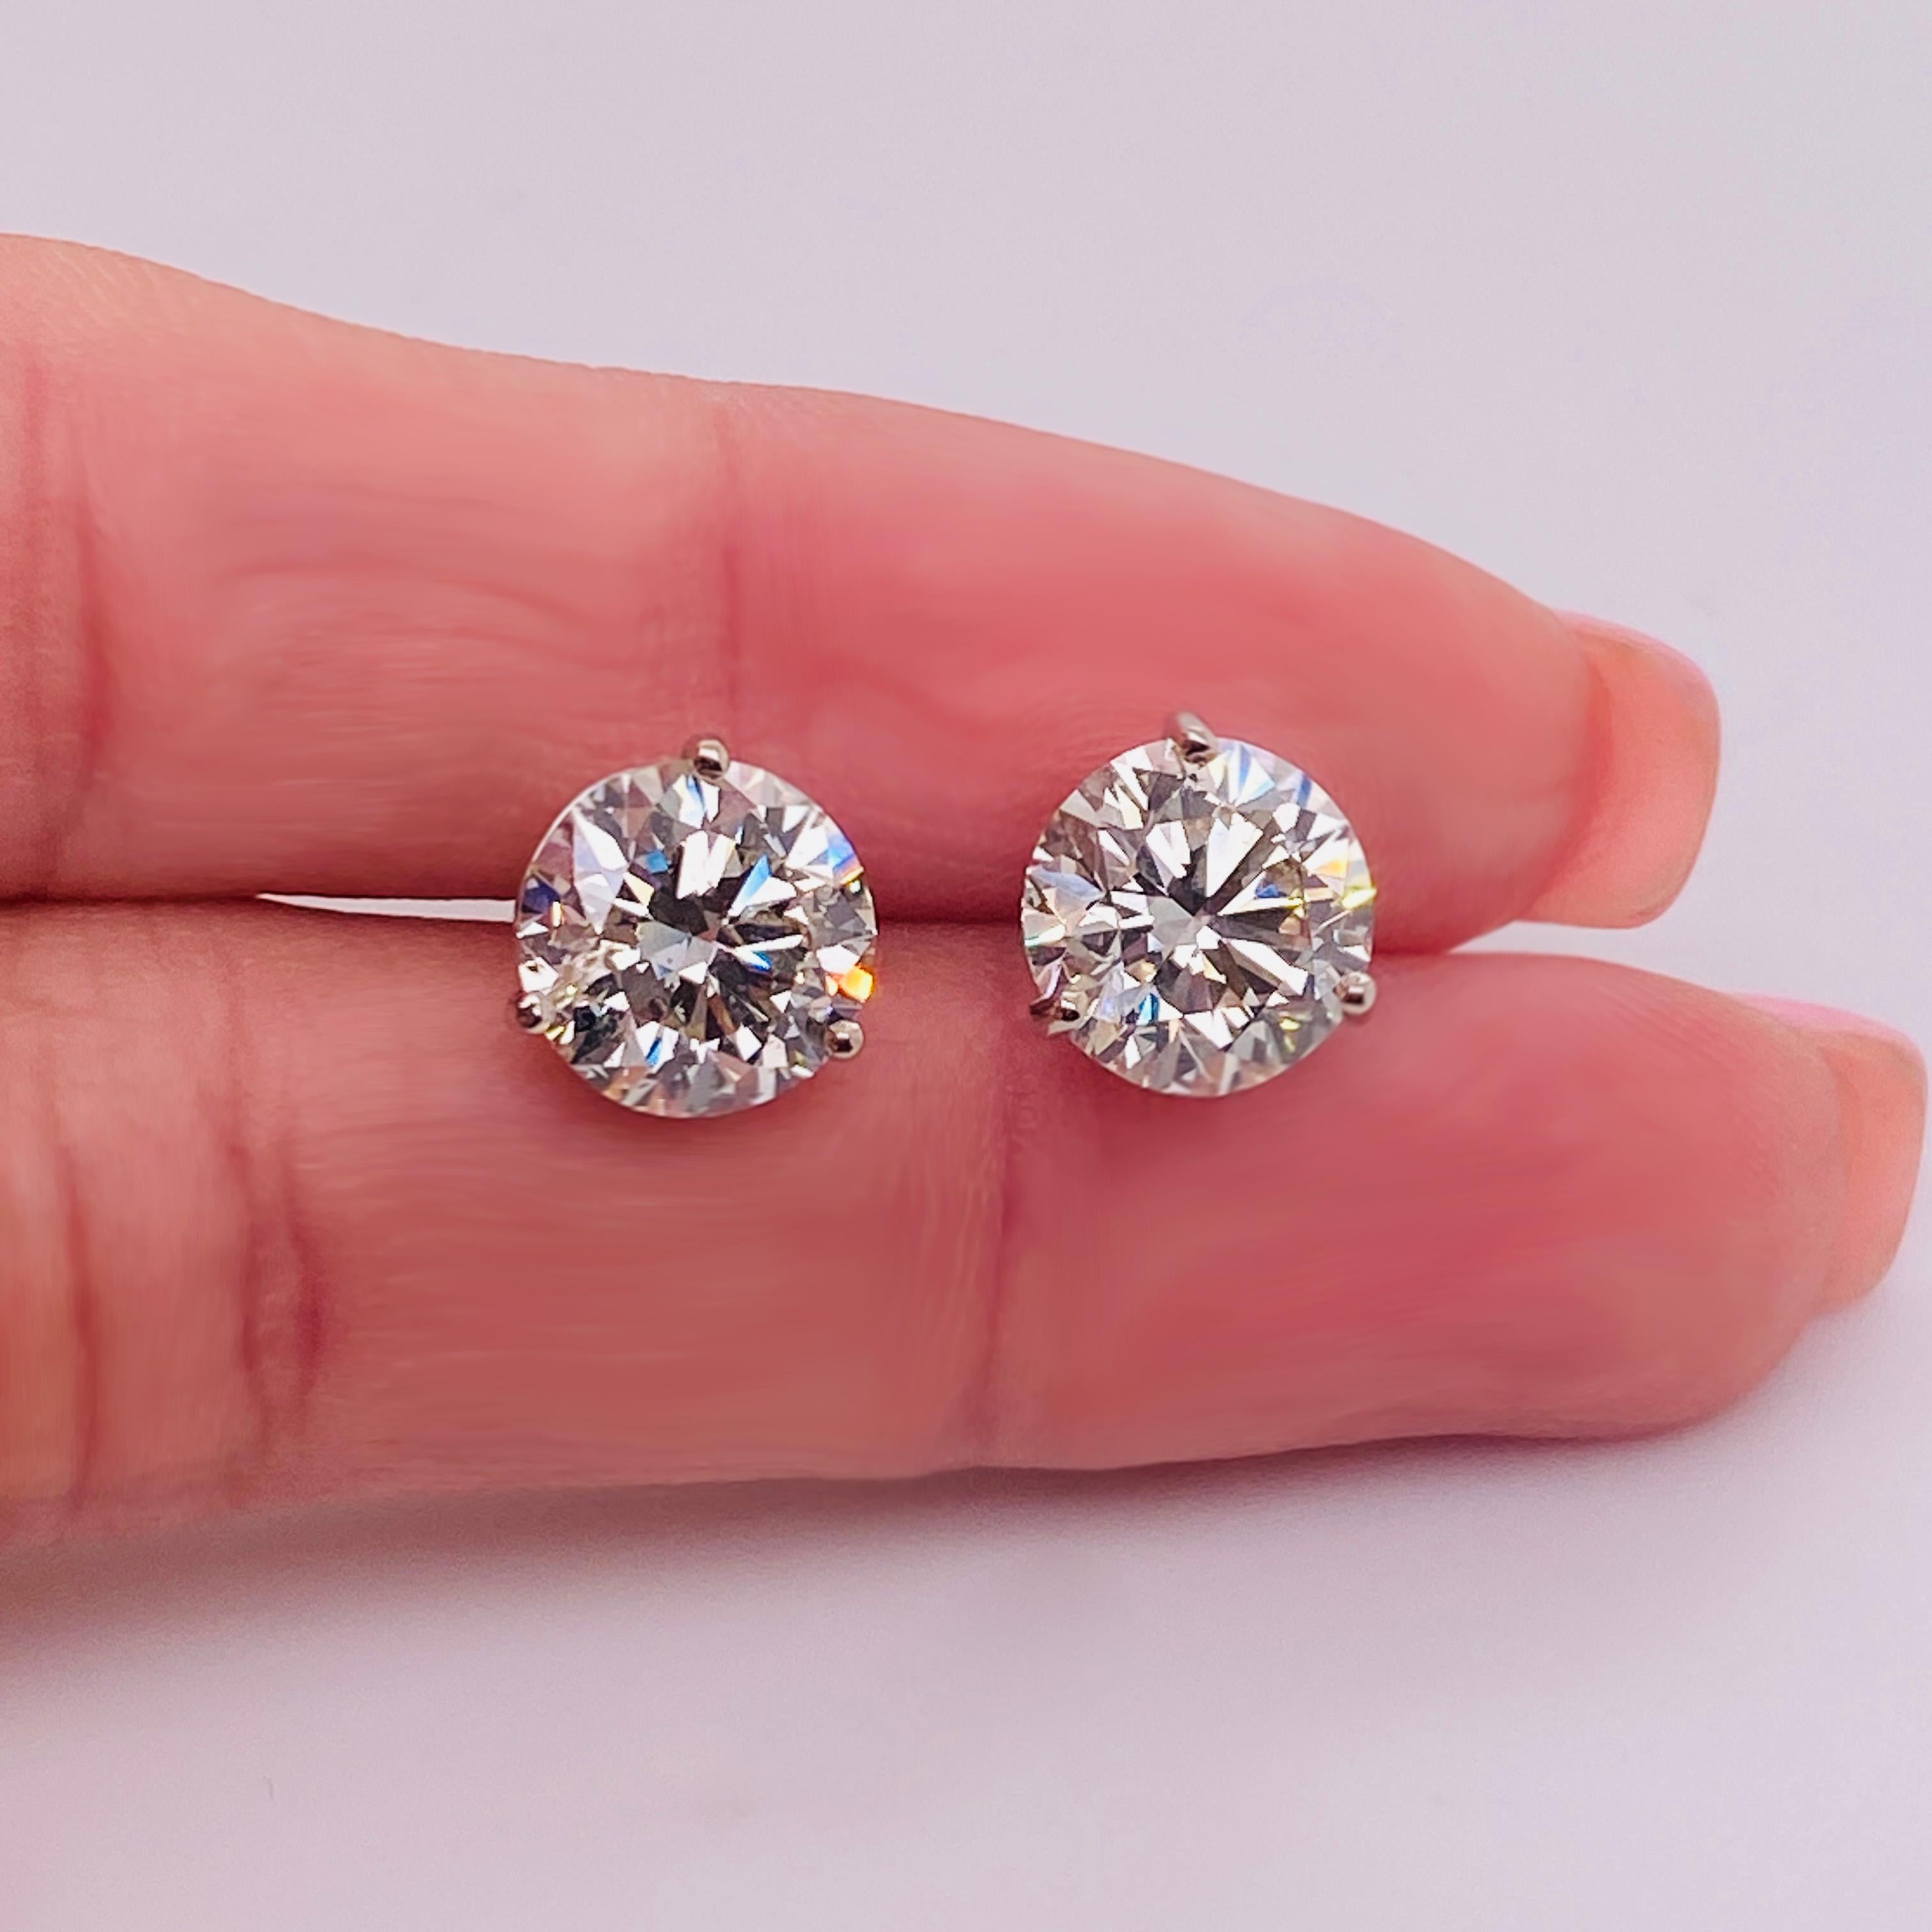 These stunning martini stud diamond earrings are perfect for any ear! The total weight of these diamonds is 5.38 carats with SI clarity and G-H color. Will you be the one to rock these gems? Martini studs are popular because they have a low profile